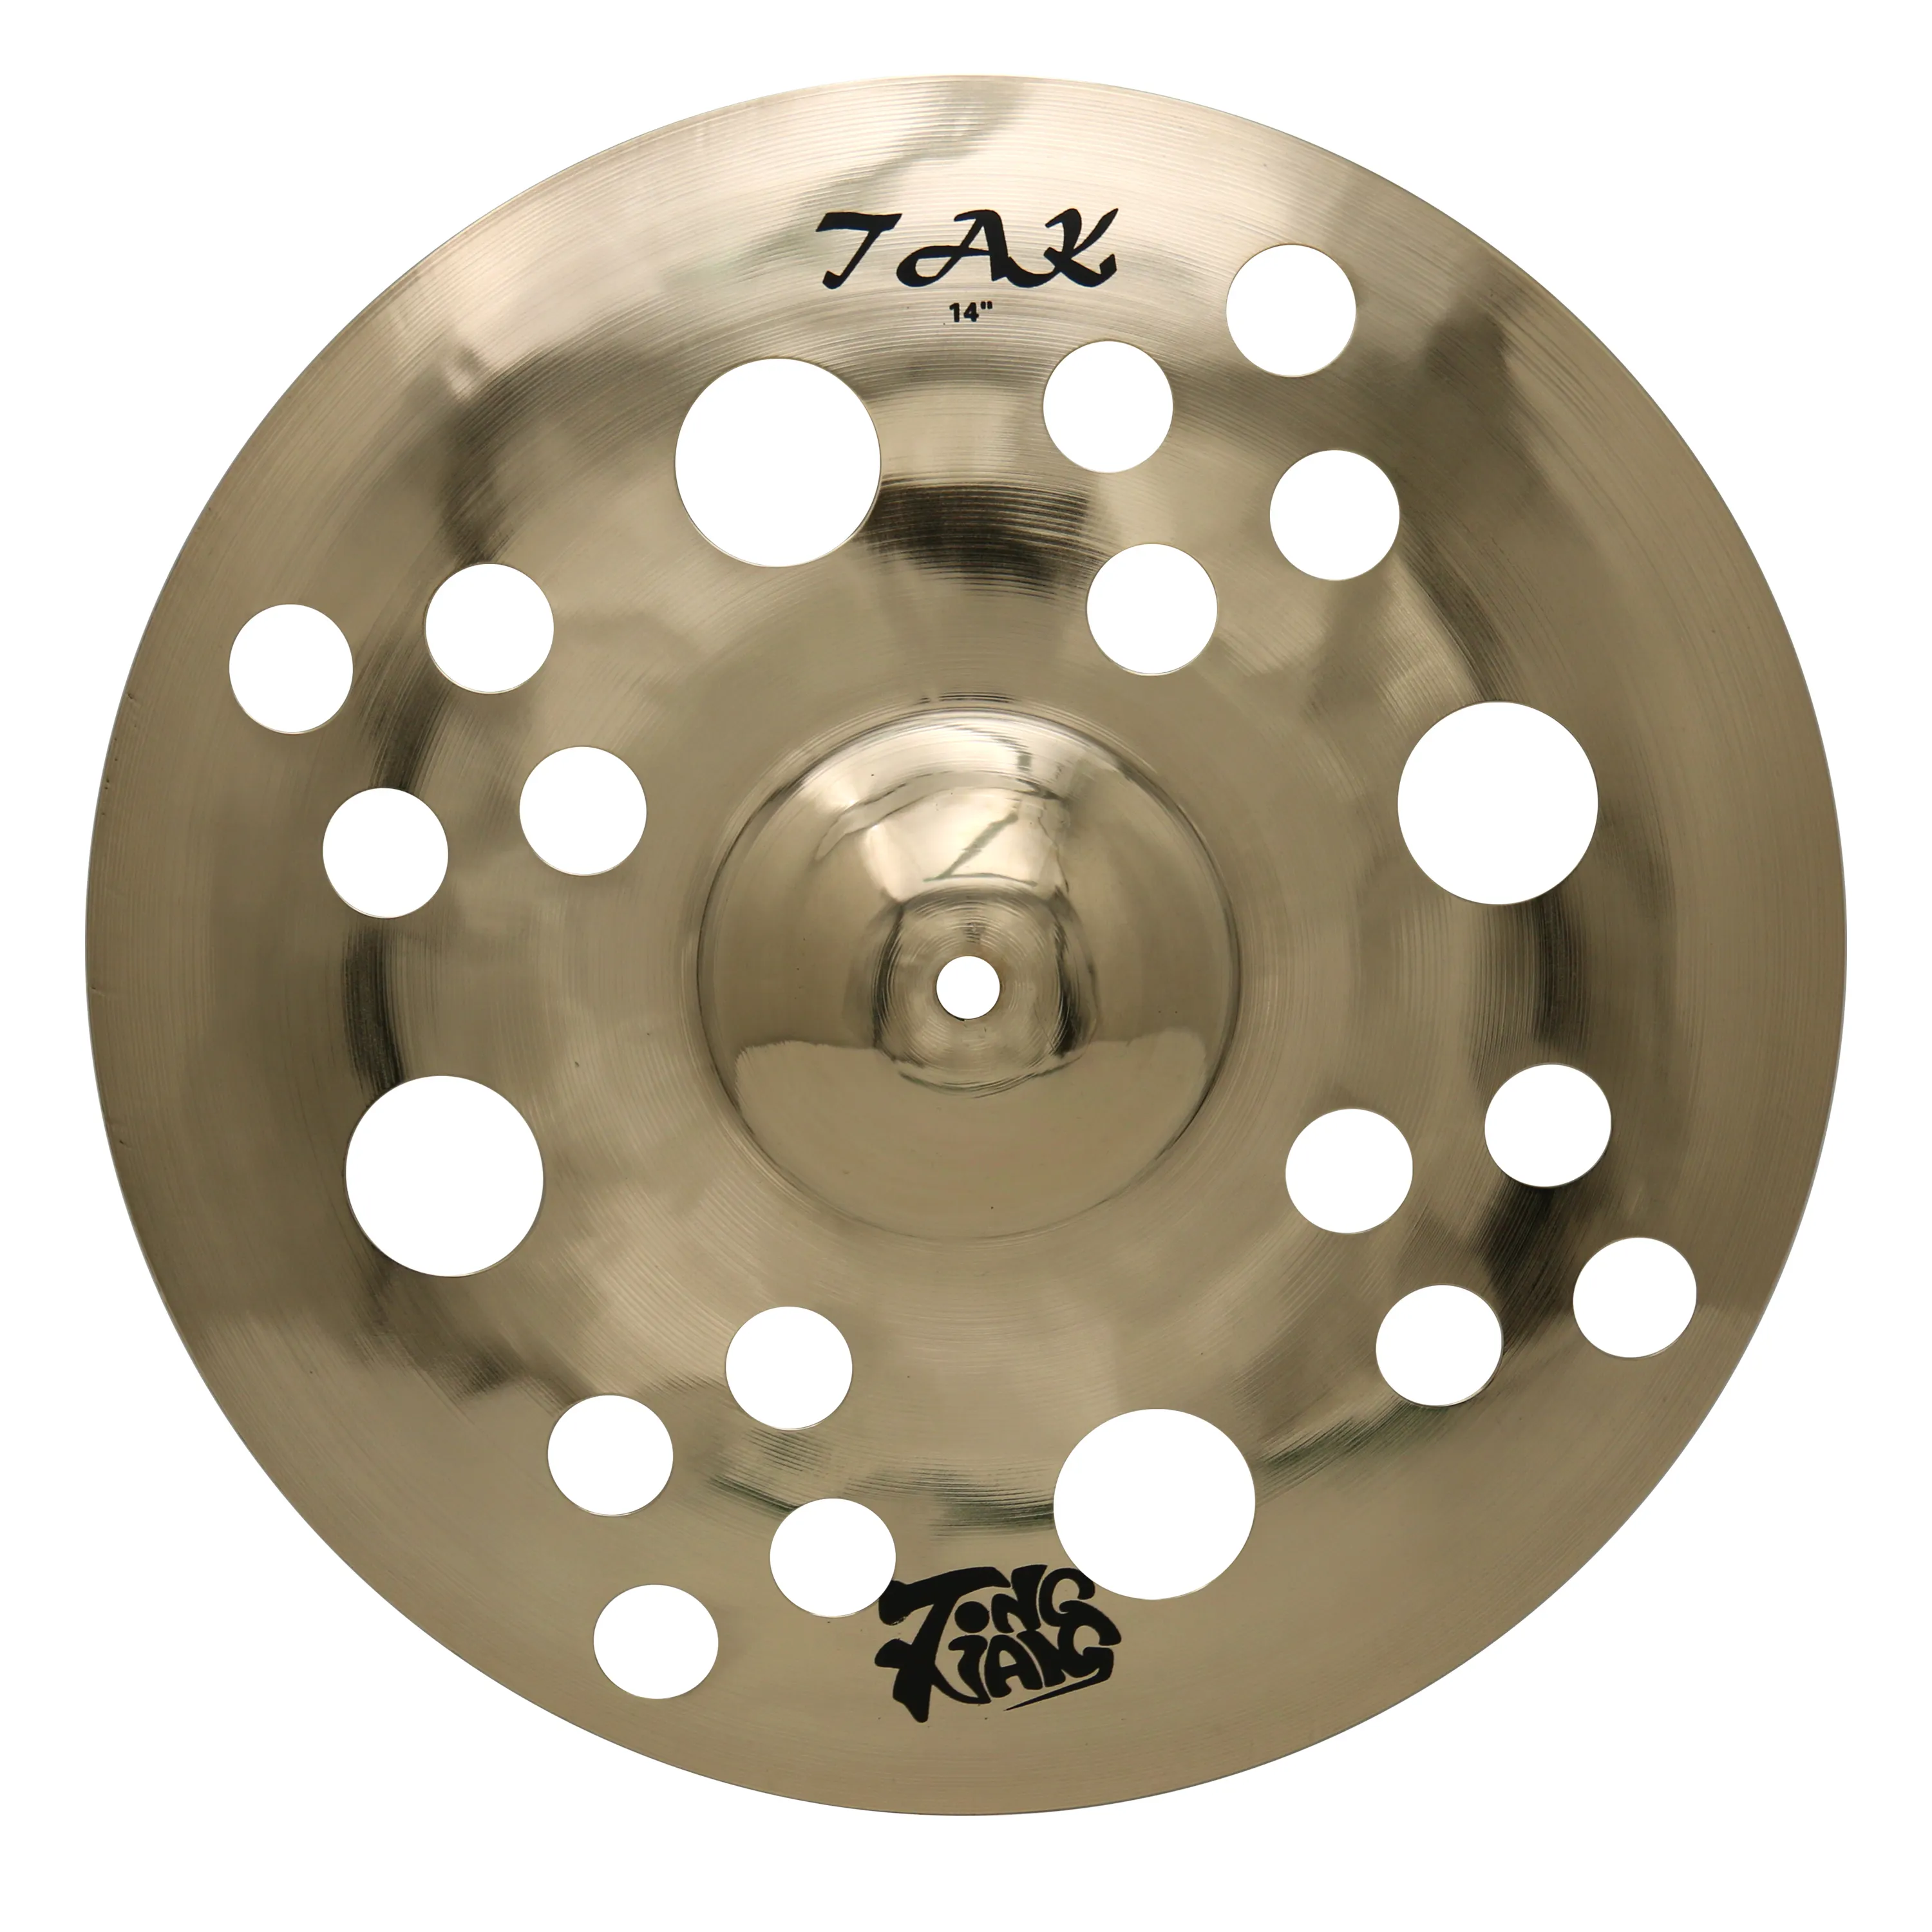 wholesale B20 handmade Efx 16inch cymbals for drums from Tongxiang musical instrument factory